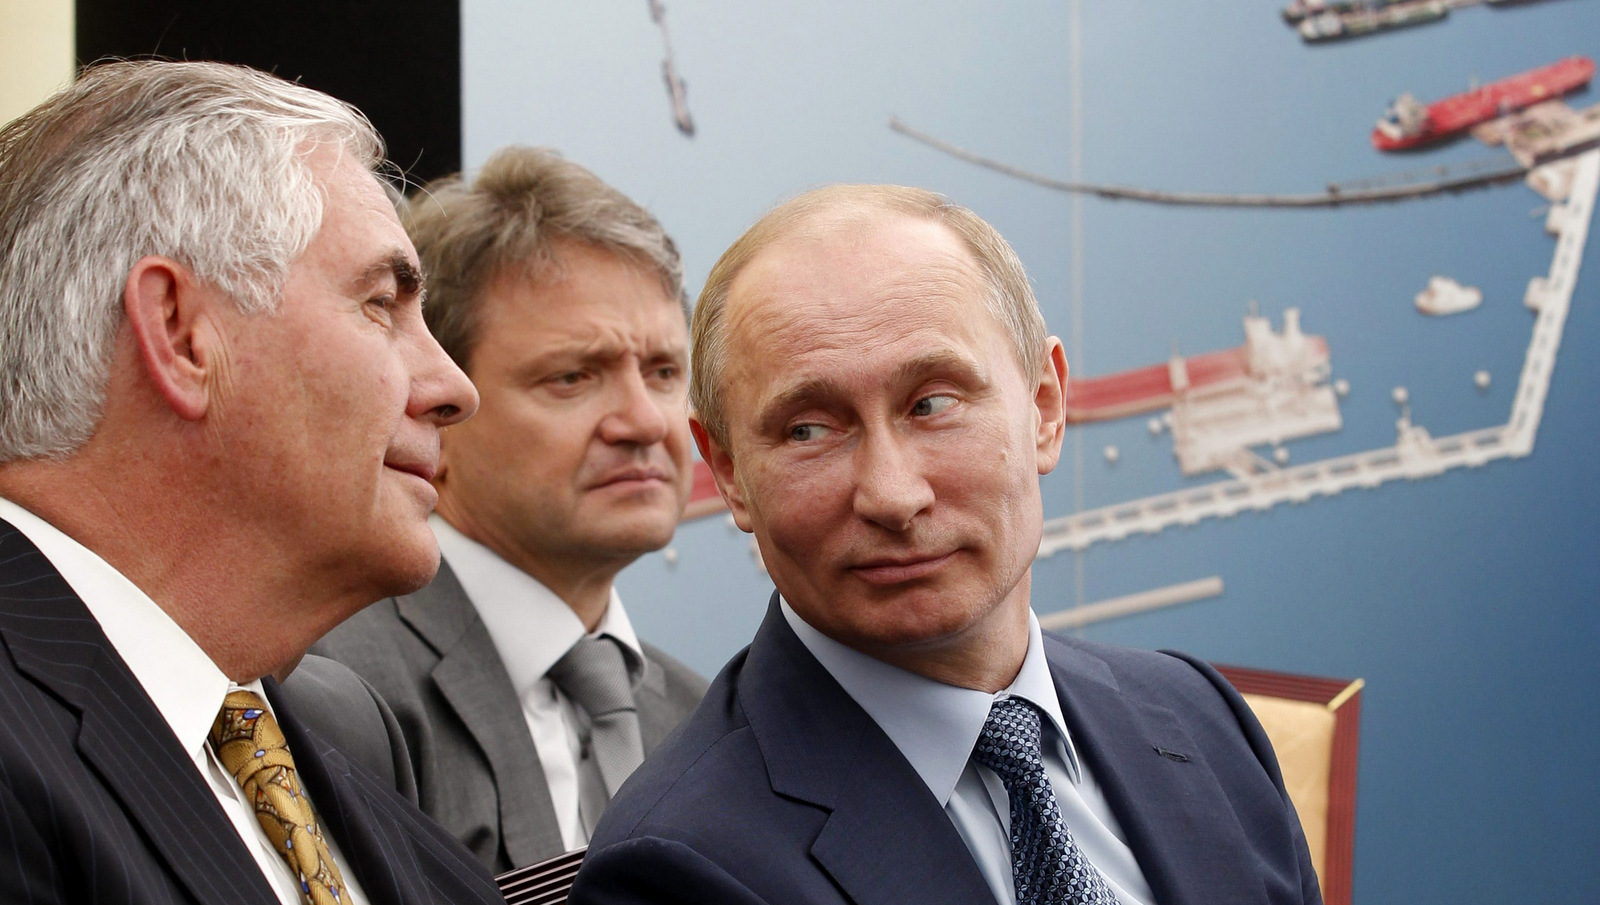 Russian President Vladimir Putin, right, and Exxon Mobil Corp. CEO Rex Tillerson, left, attend a signing ceremony of an agreement between state-controlled Russian oil company Rosneft and Exxon Mobil corporation at the Black Sea port of Tuapse, Russia, June 15, 2012. (AP/RIA-Novosti, Mikhail Klimentyev)